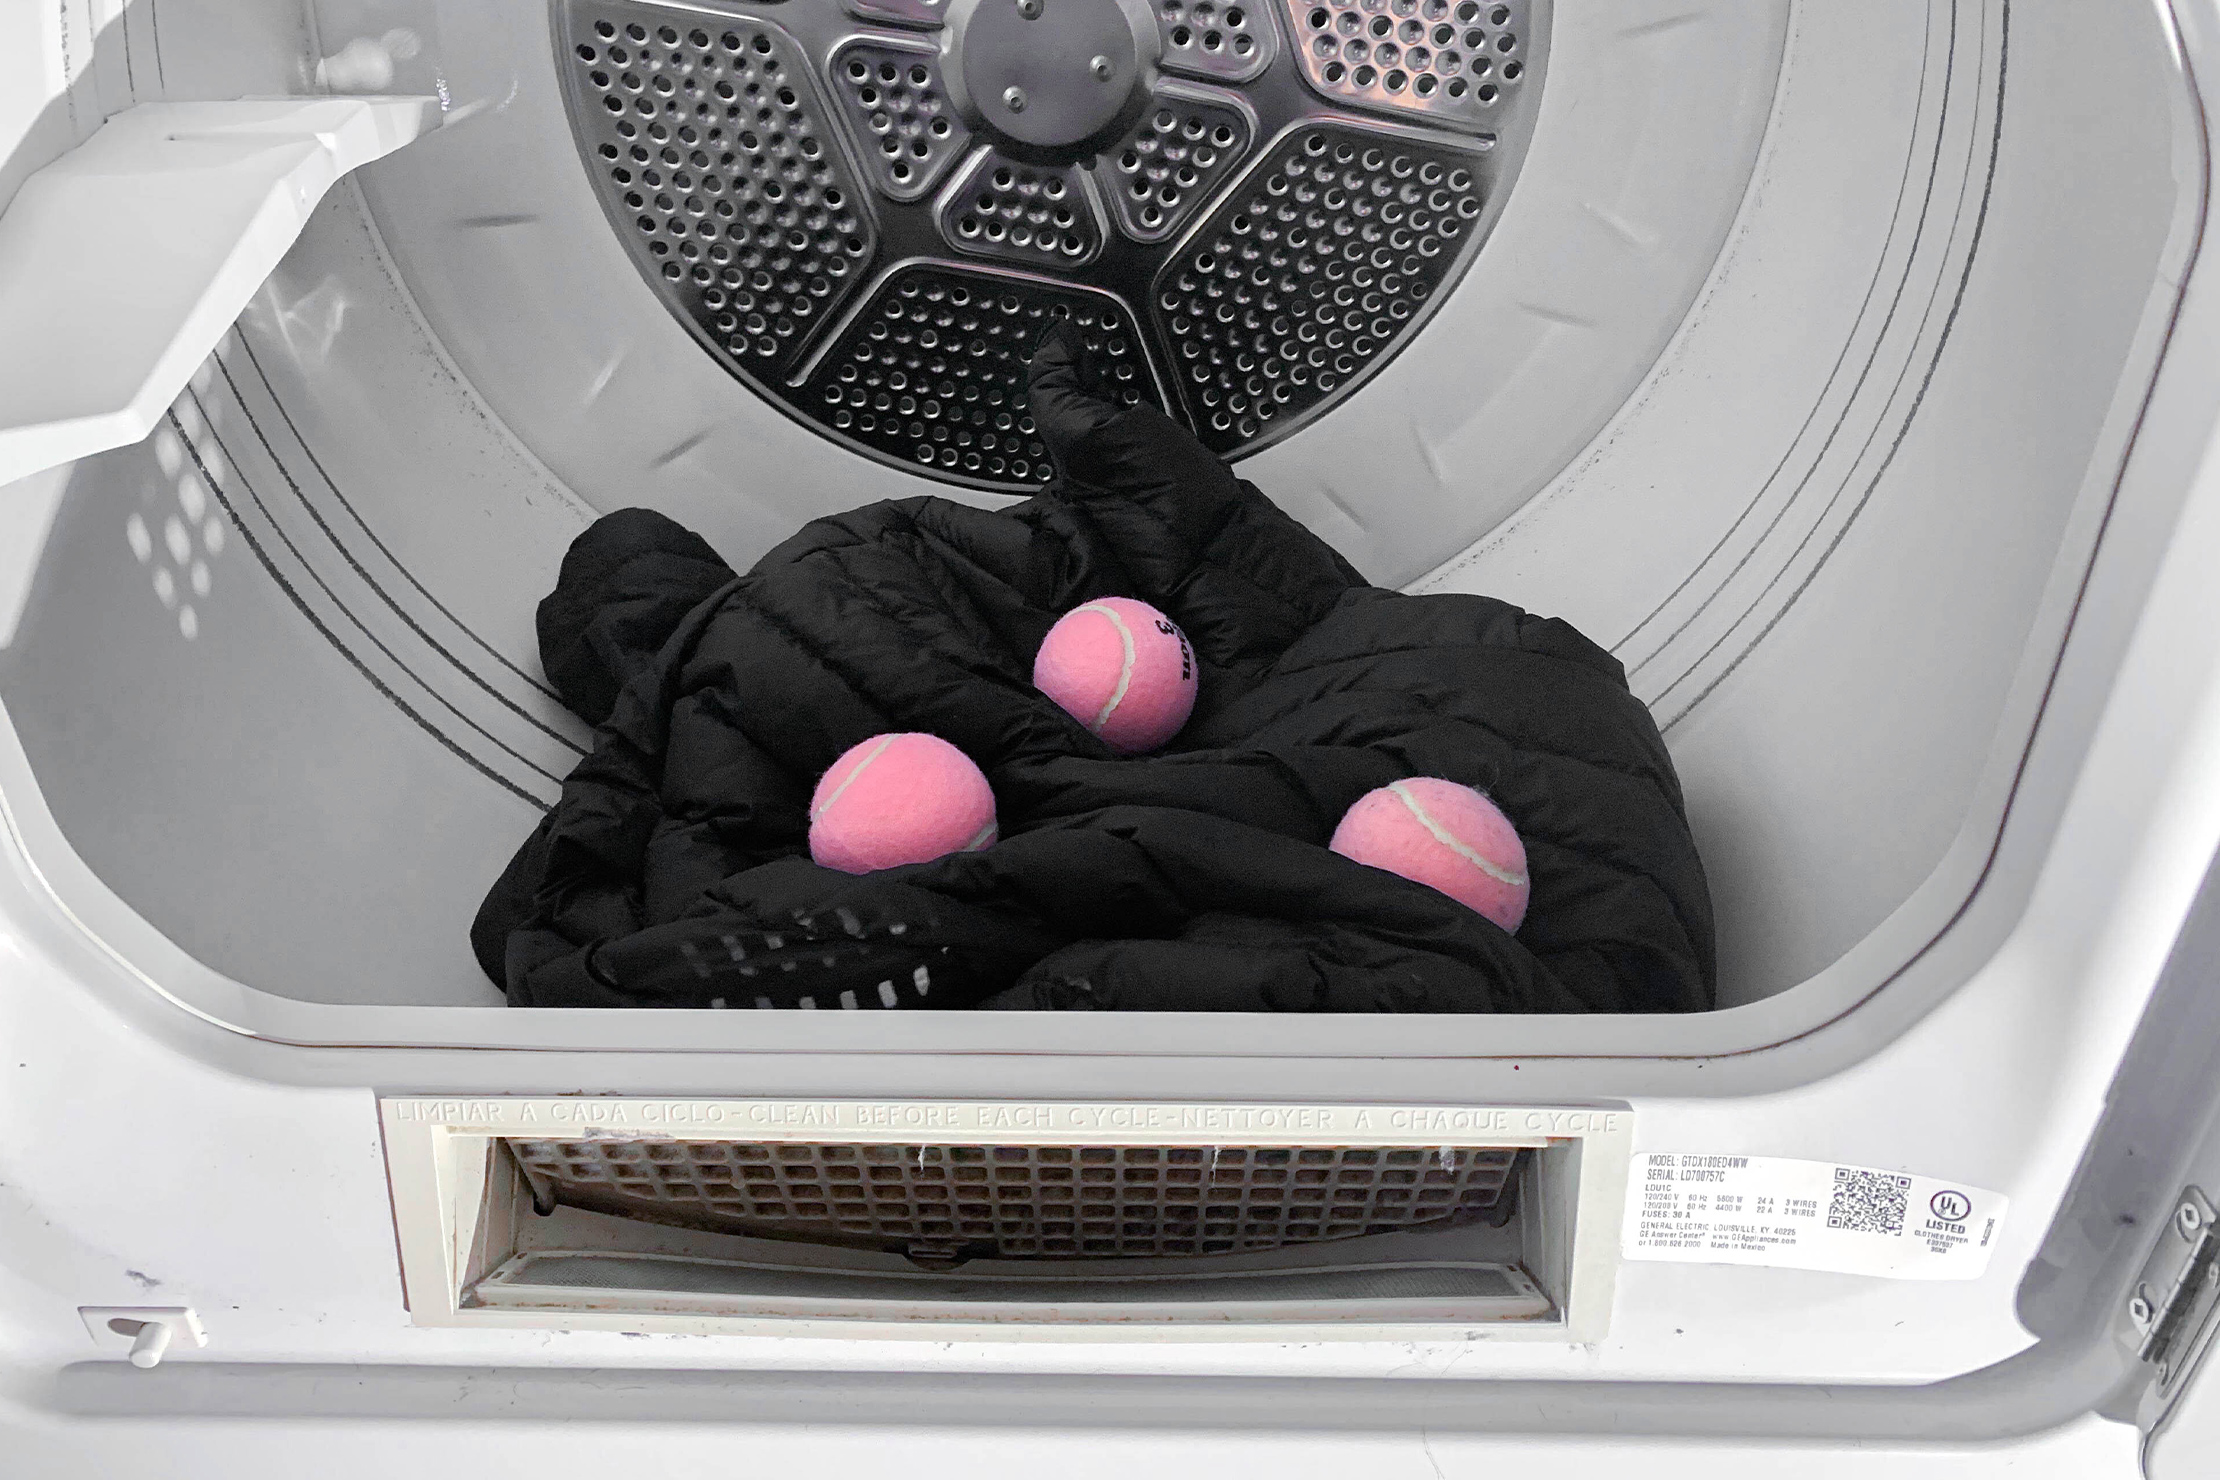 Putting Jacket in Dryer with Tennis Balls